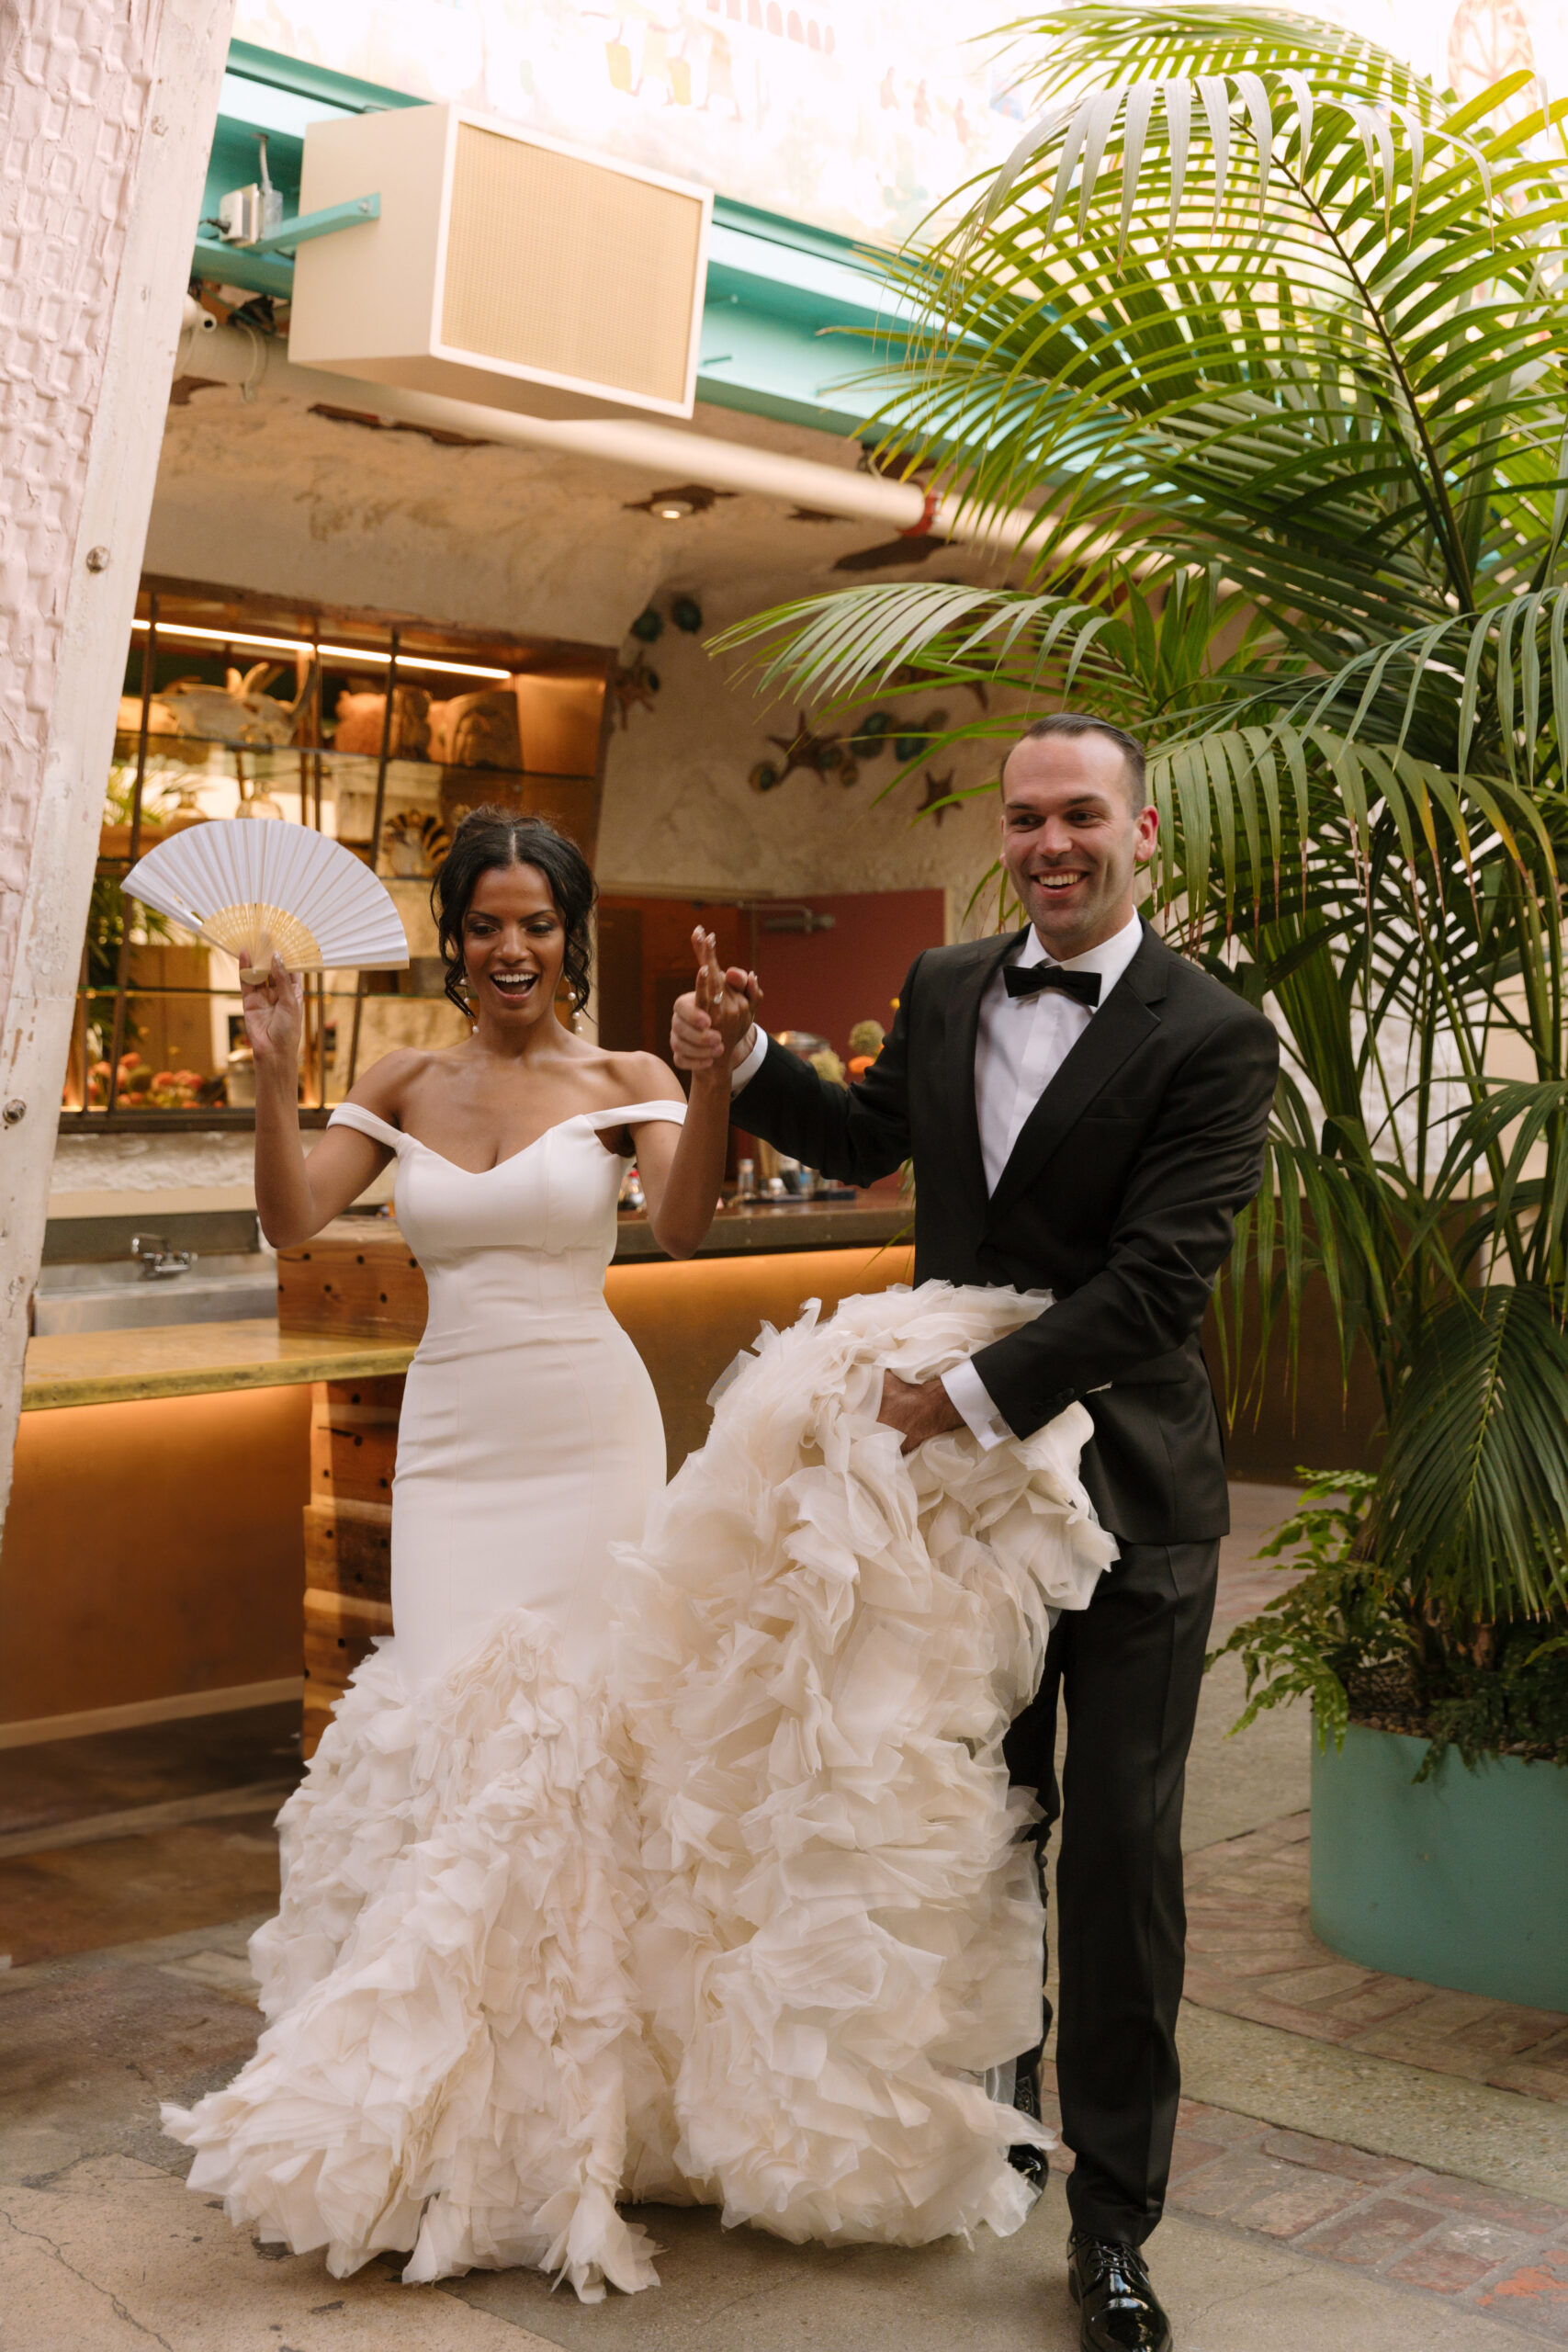 Black bride and white groom making grand entrance into reception space at the Grass Room DTLA